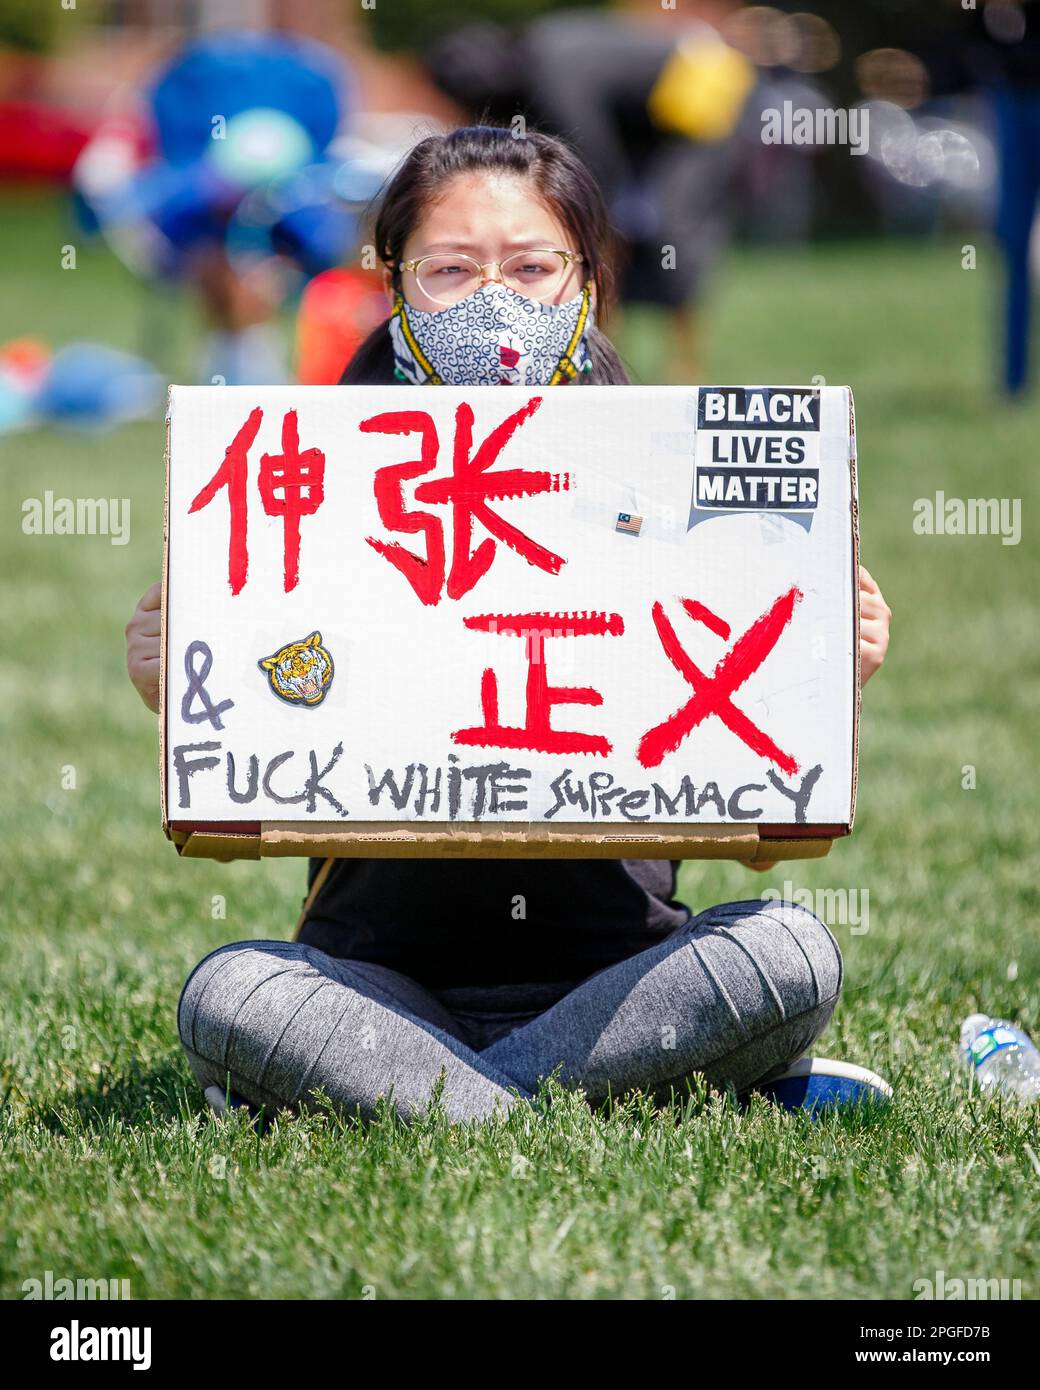 A young woman in mask holds protest sign against racism Stock Photo